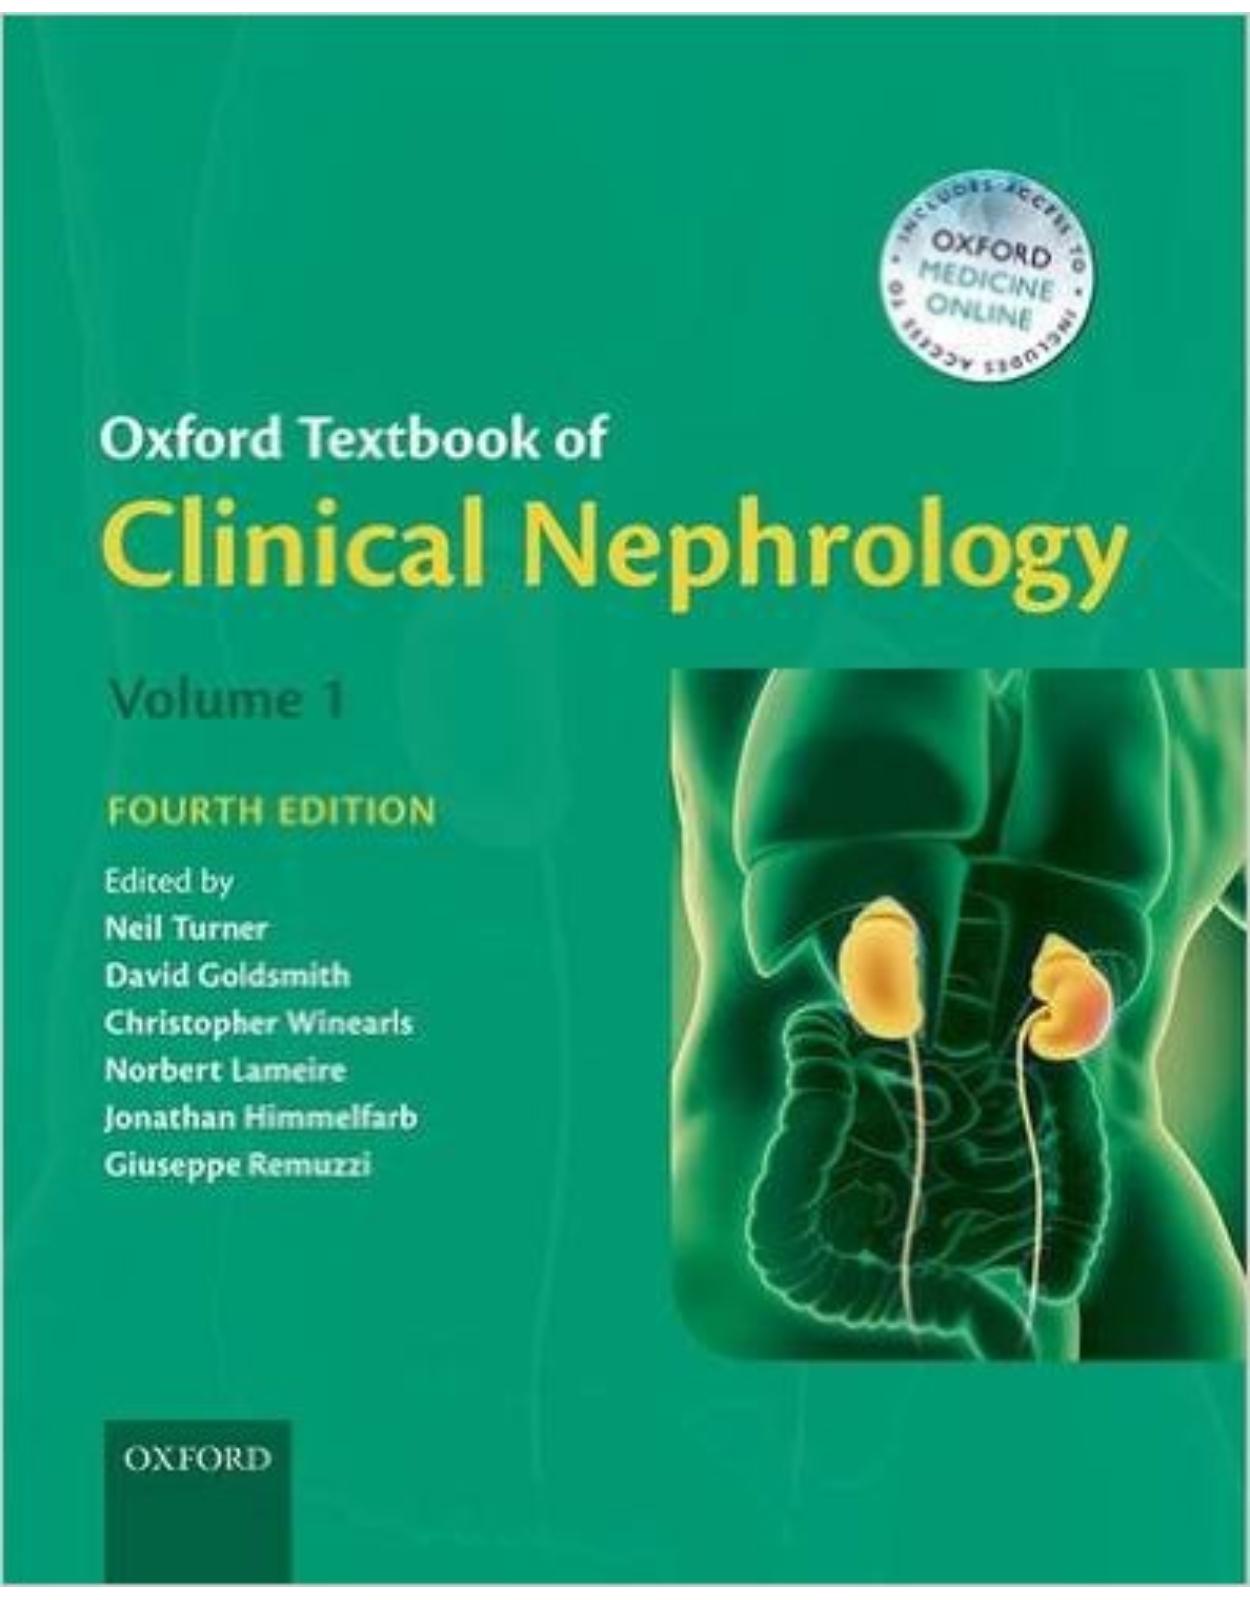 Oxford Textbook of Clinical Nephrology 4th Edition